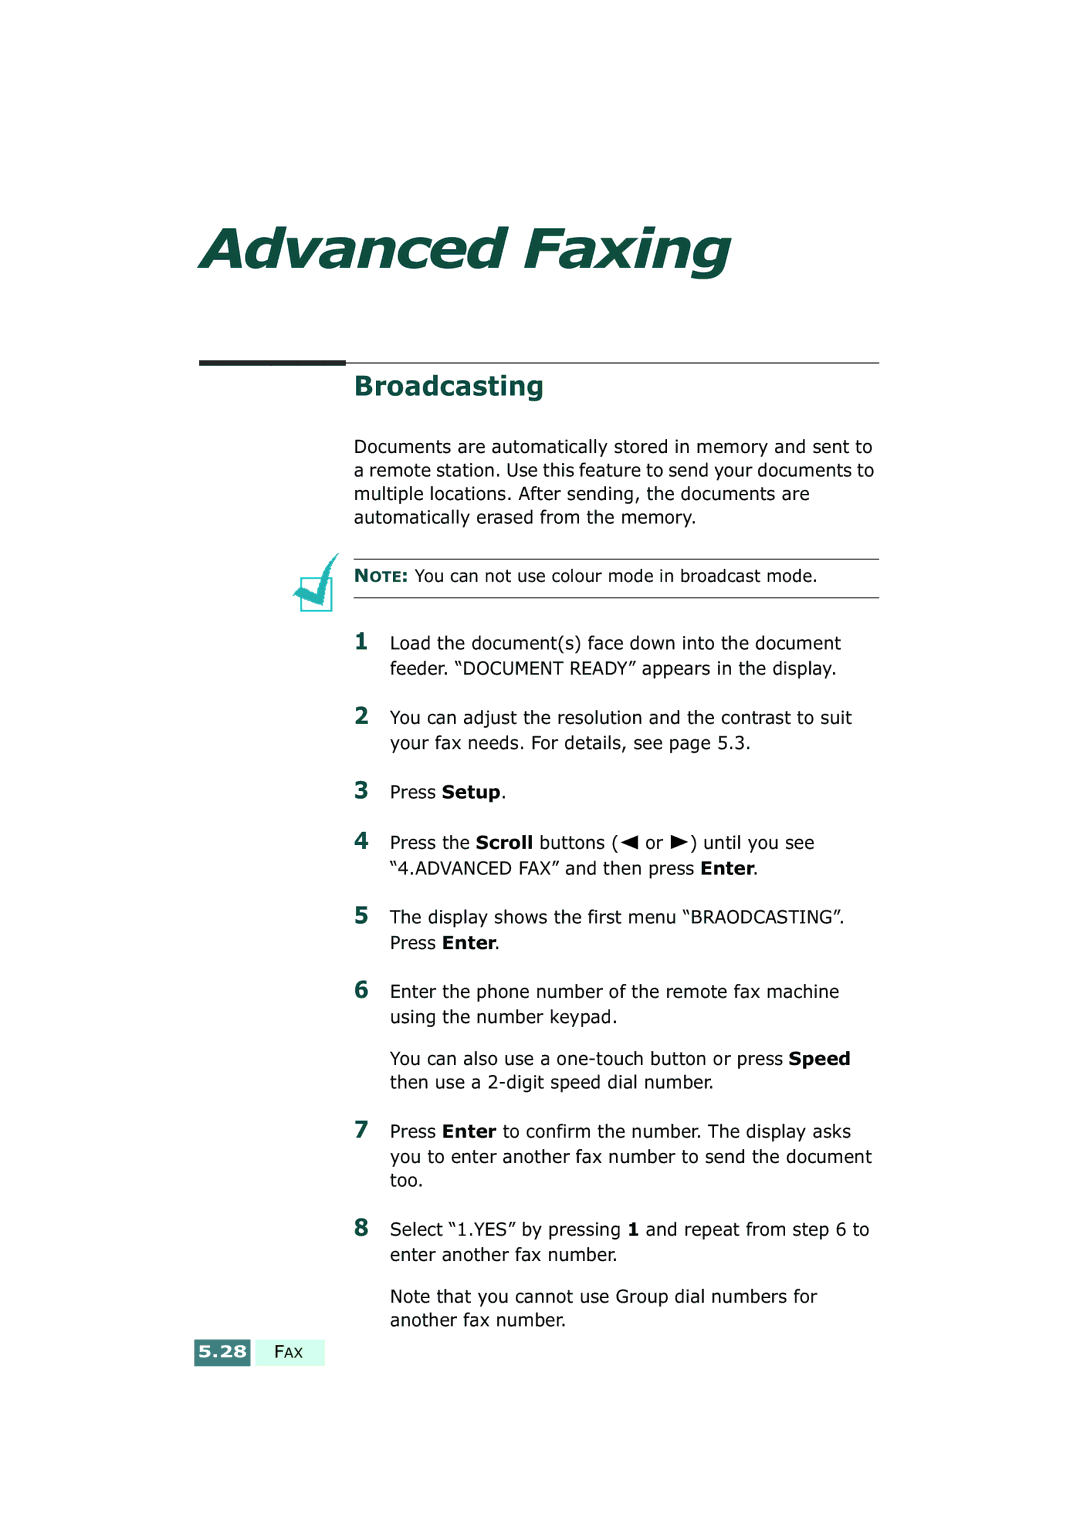 Samsung SF-430 manual Advanced Faxing, Broadcasting 